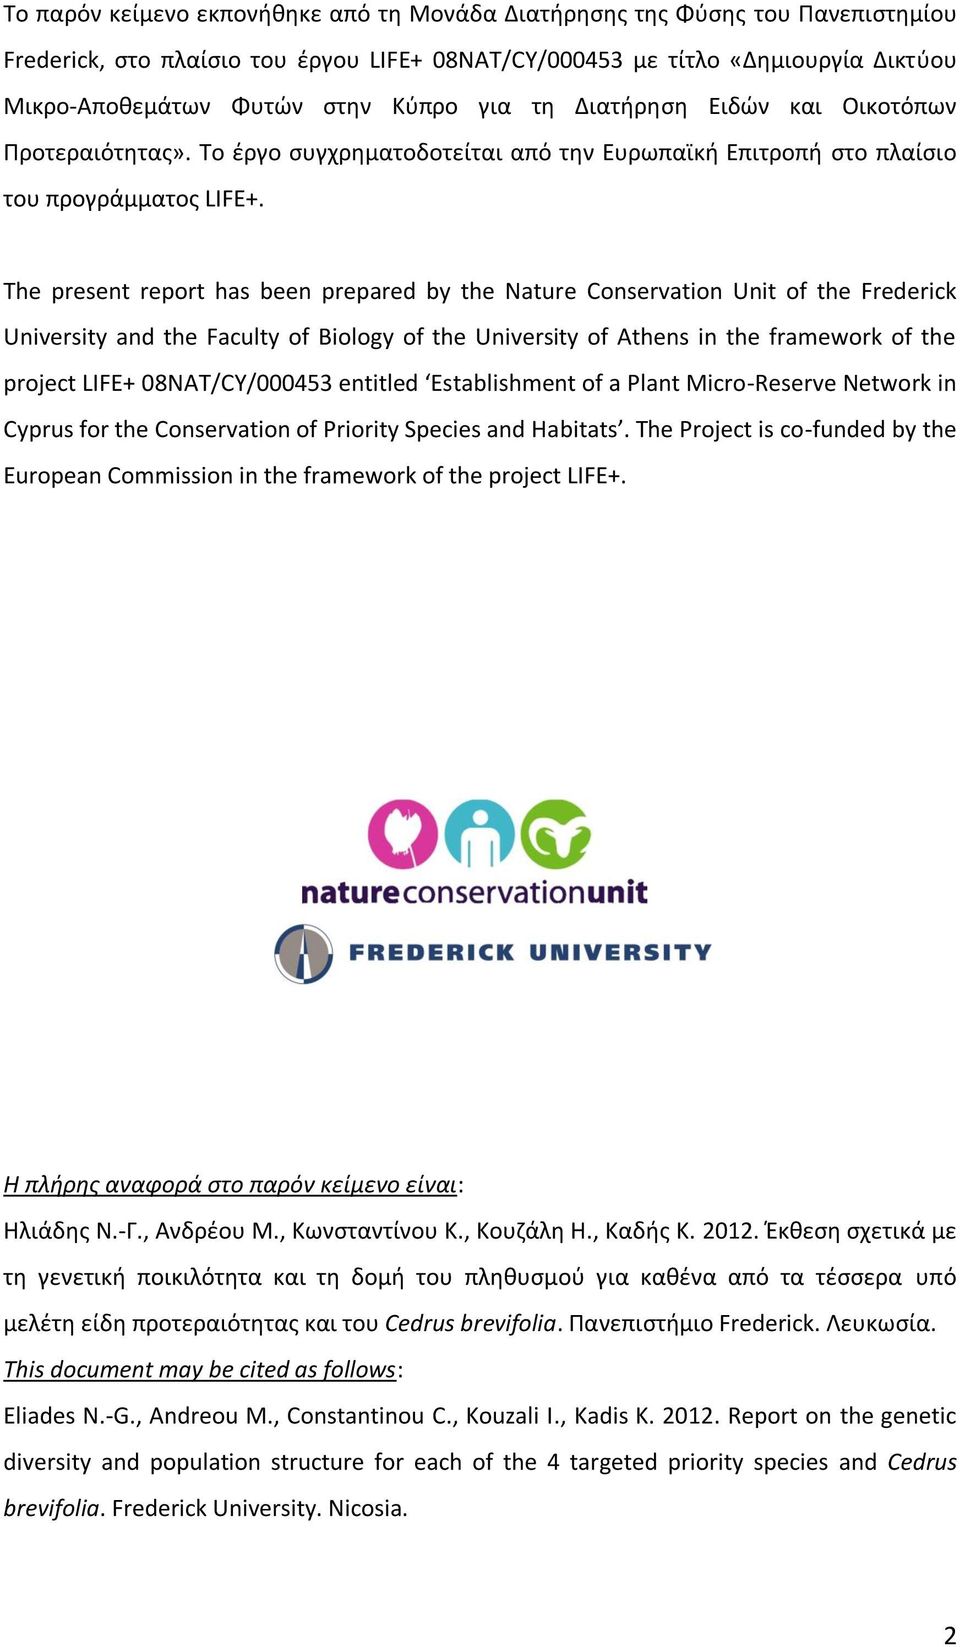 The present report has been prepared by the Nature Conservation Unit of the Frederick University and the Faculty of Biology of the University of Athens in the framework of the project LIFE+